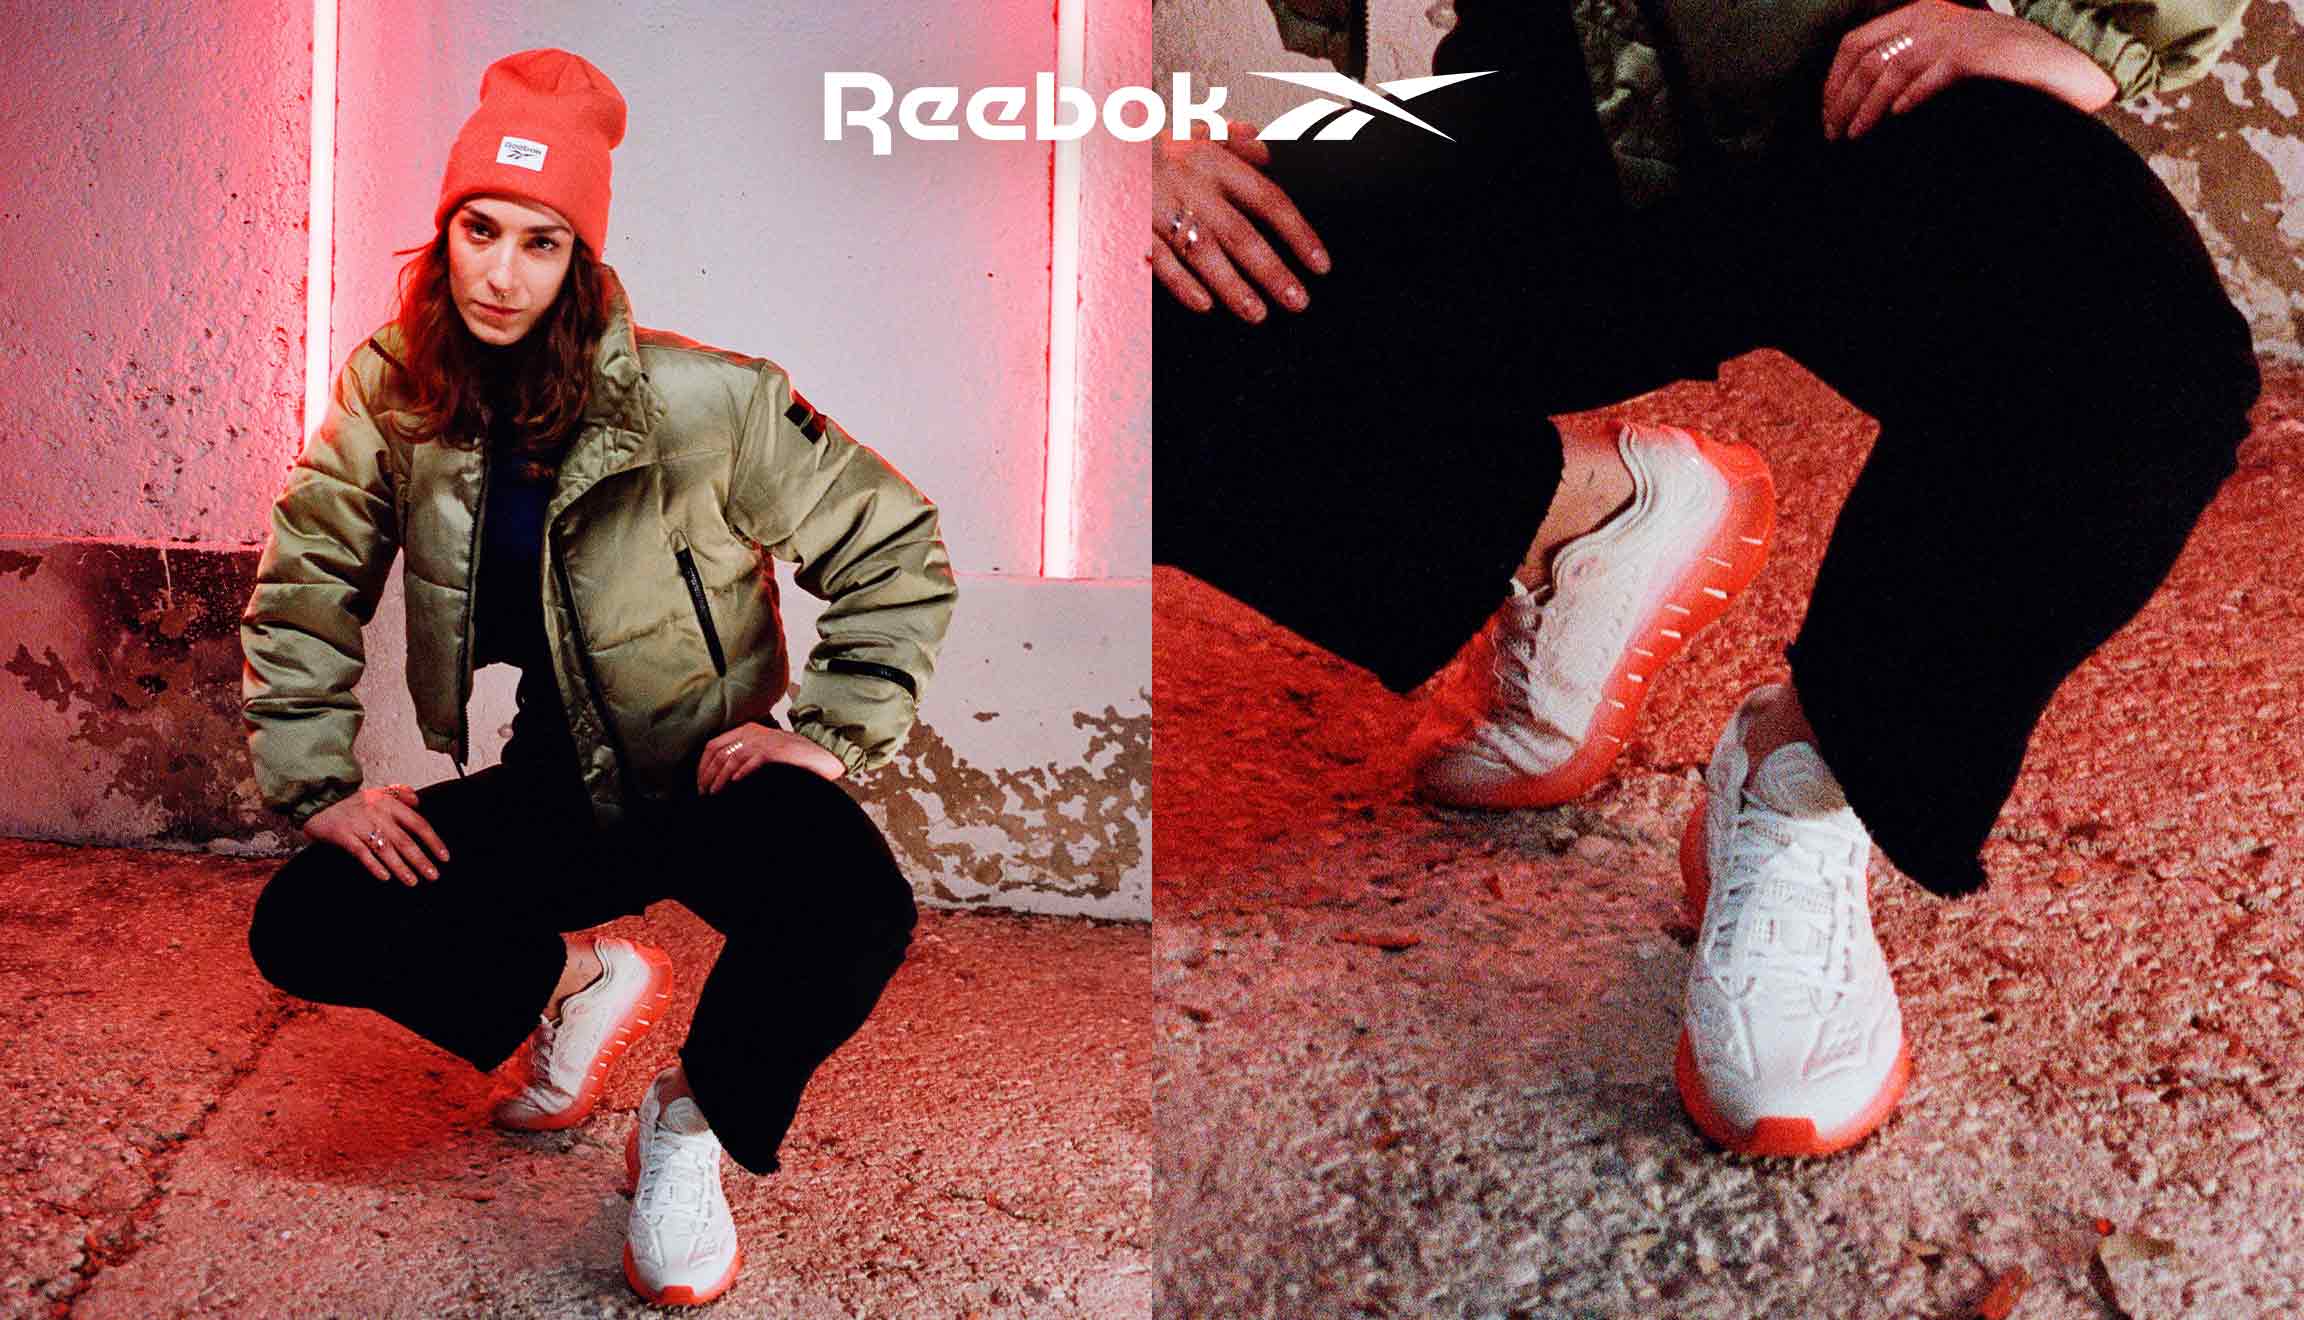 Zalando: How Reebok leverages data to understand customers and steer brand  perception